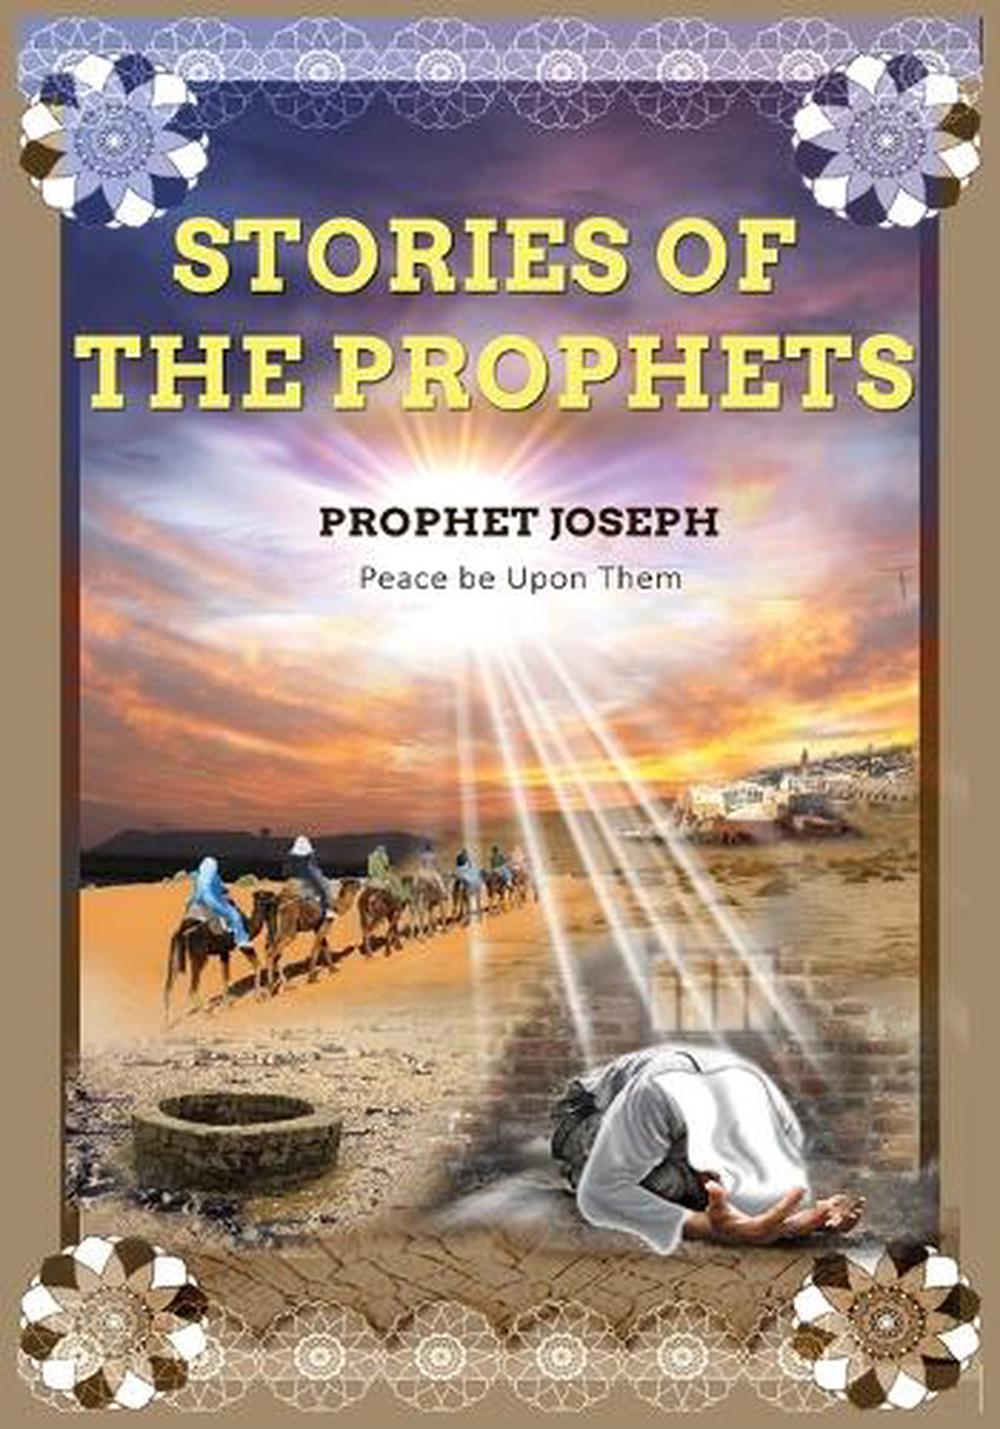 Stories of the Prophets by Jim Ras (English) Paperback Book Free